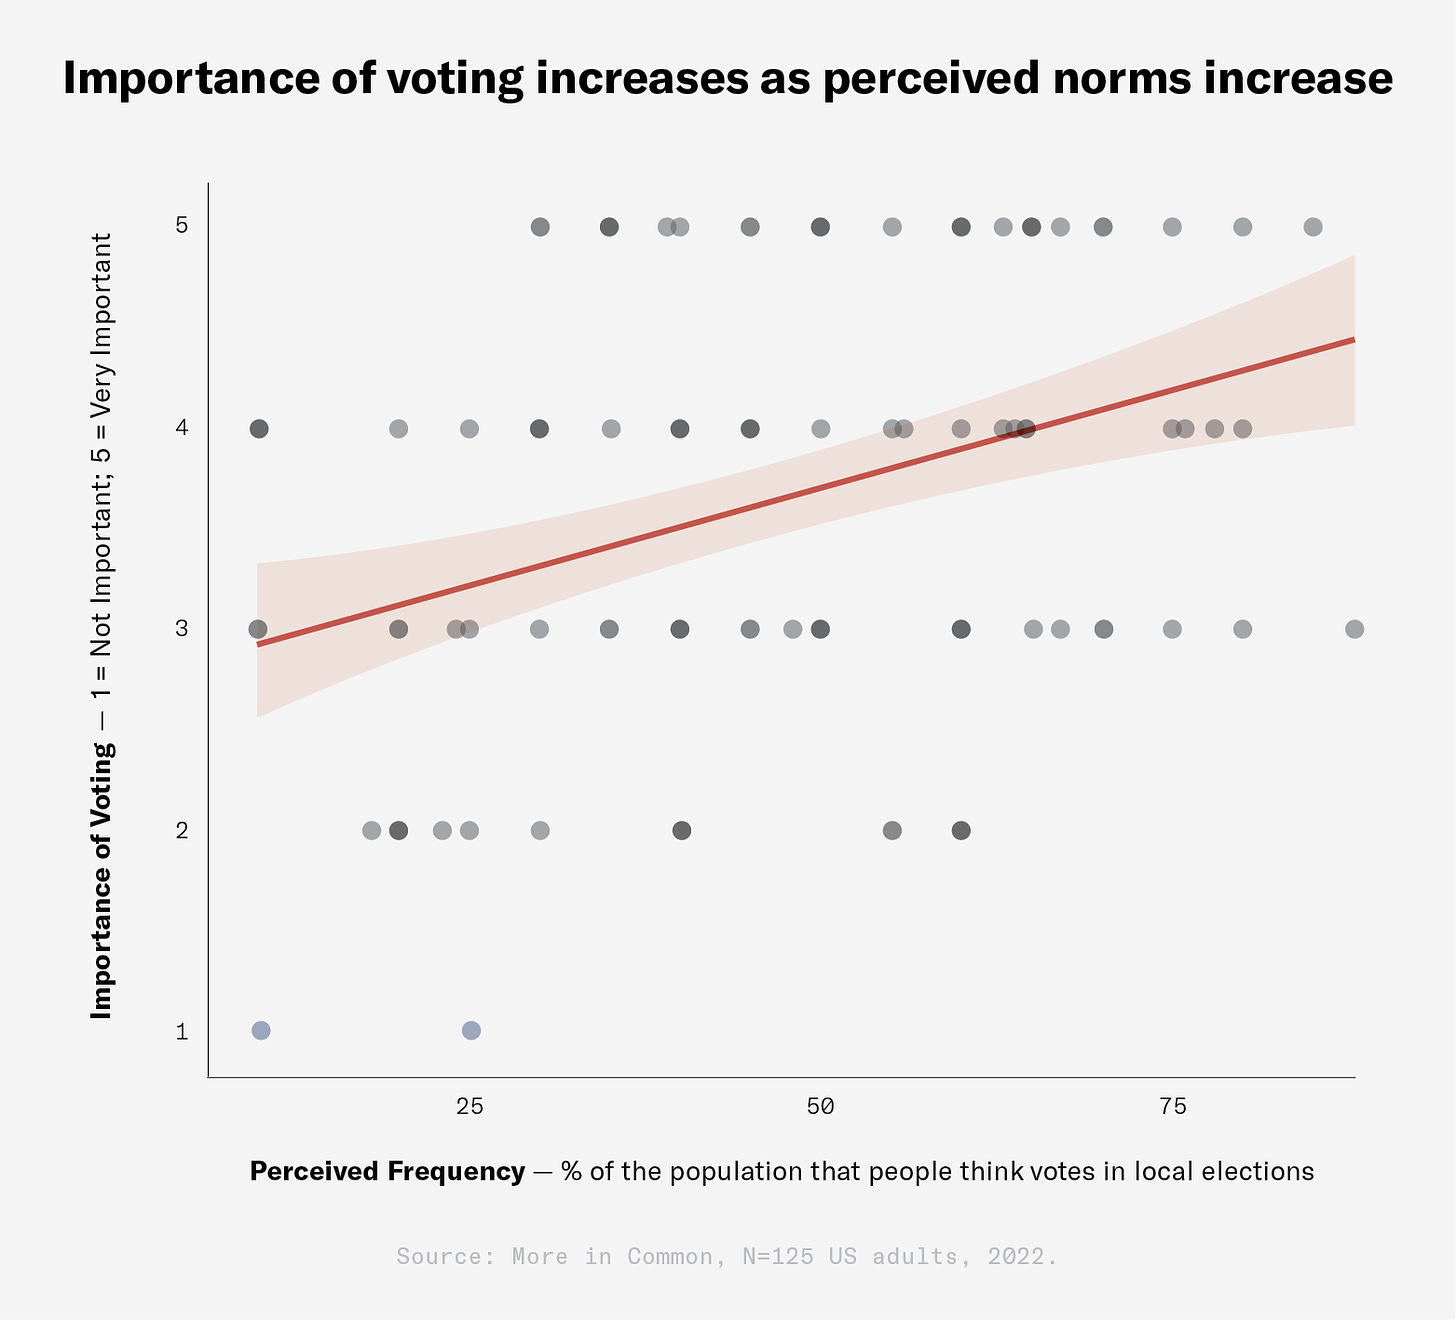 Importance of voting increases as perceived norms increase